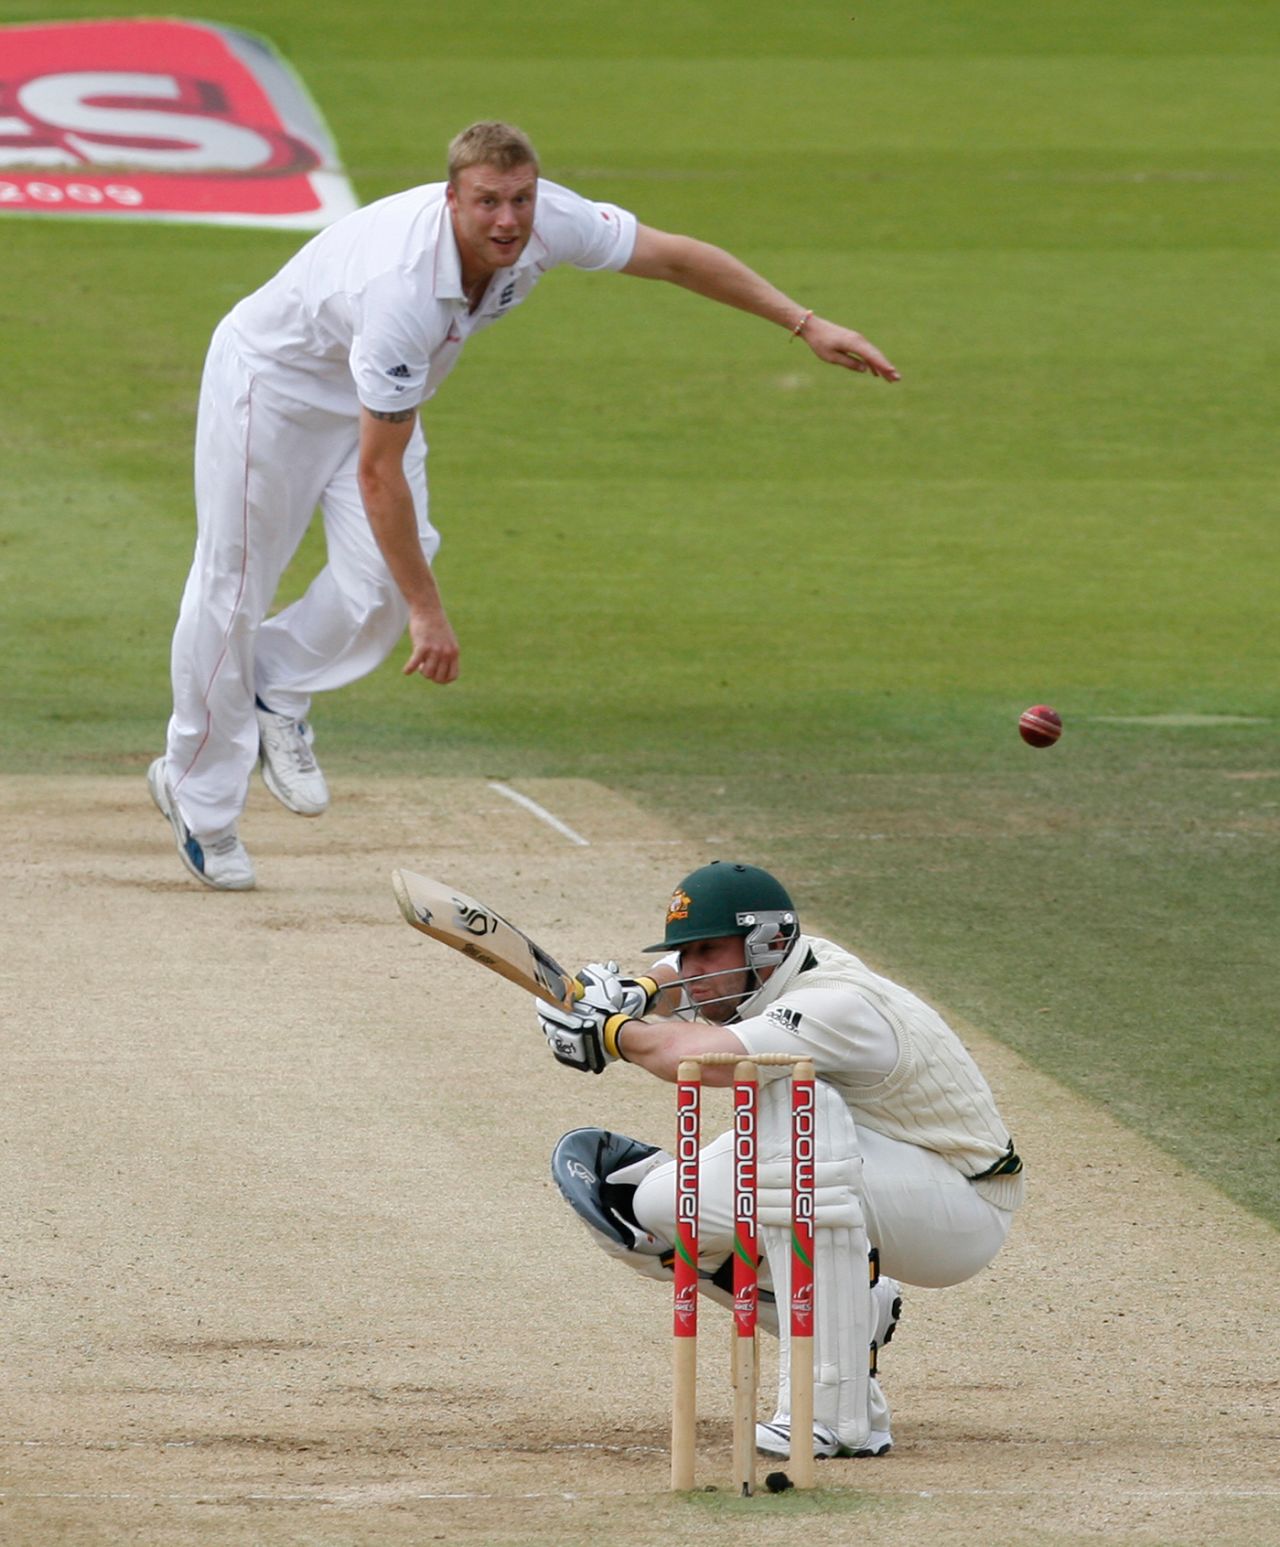 Andrew Flintoff bounces Phillip Hughes, England v Australia, 2nd Test, Lord's, 4th day, July 19, 2009